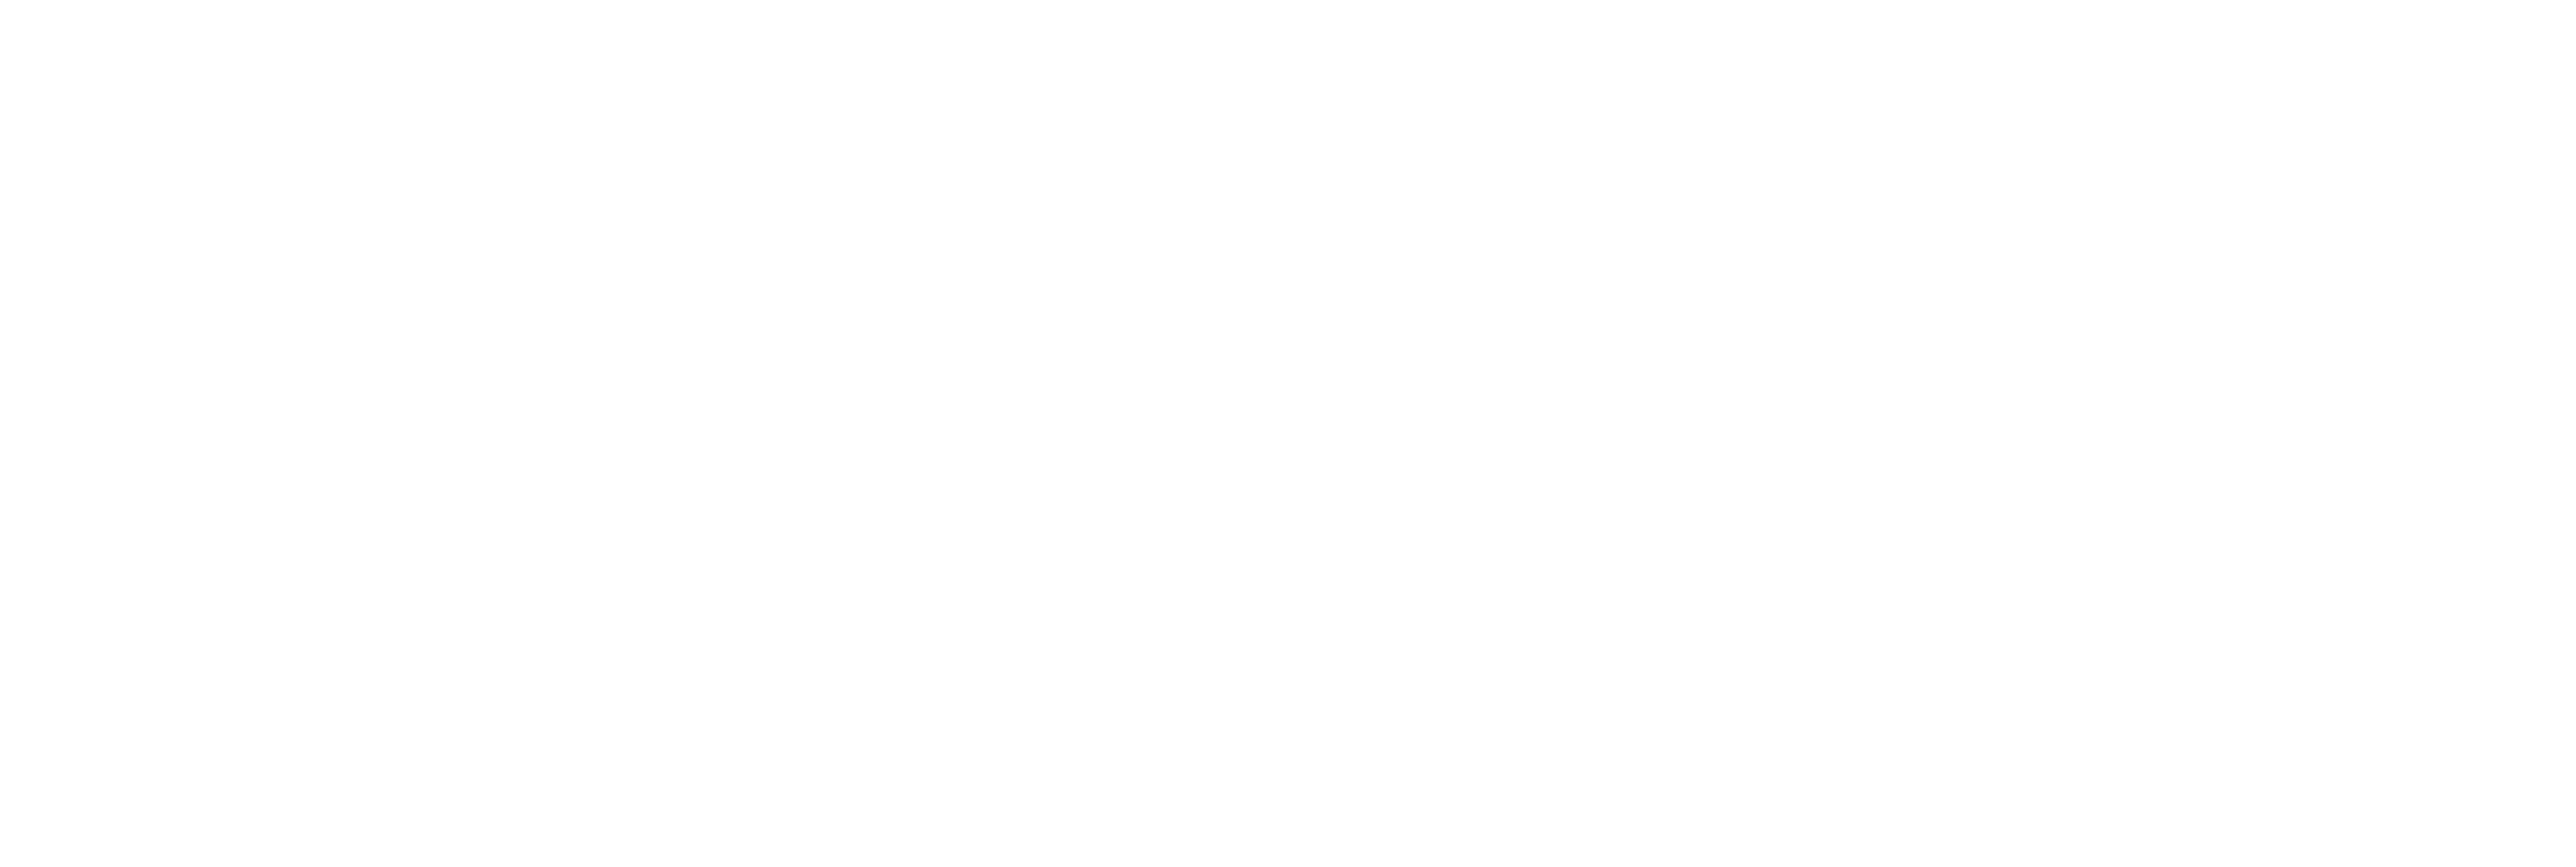 Confessions of a Prairie Mom